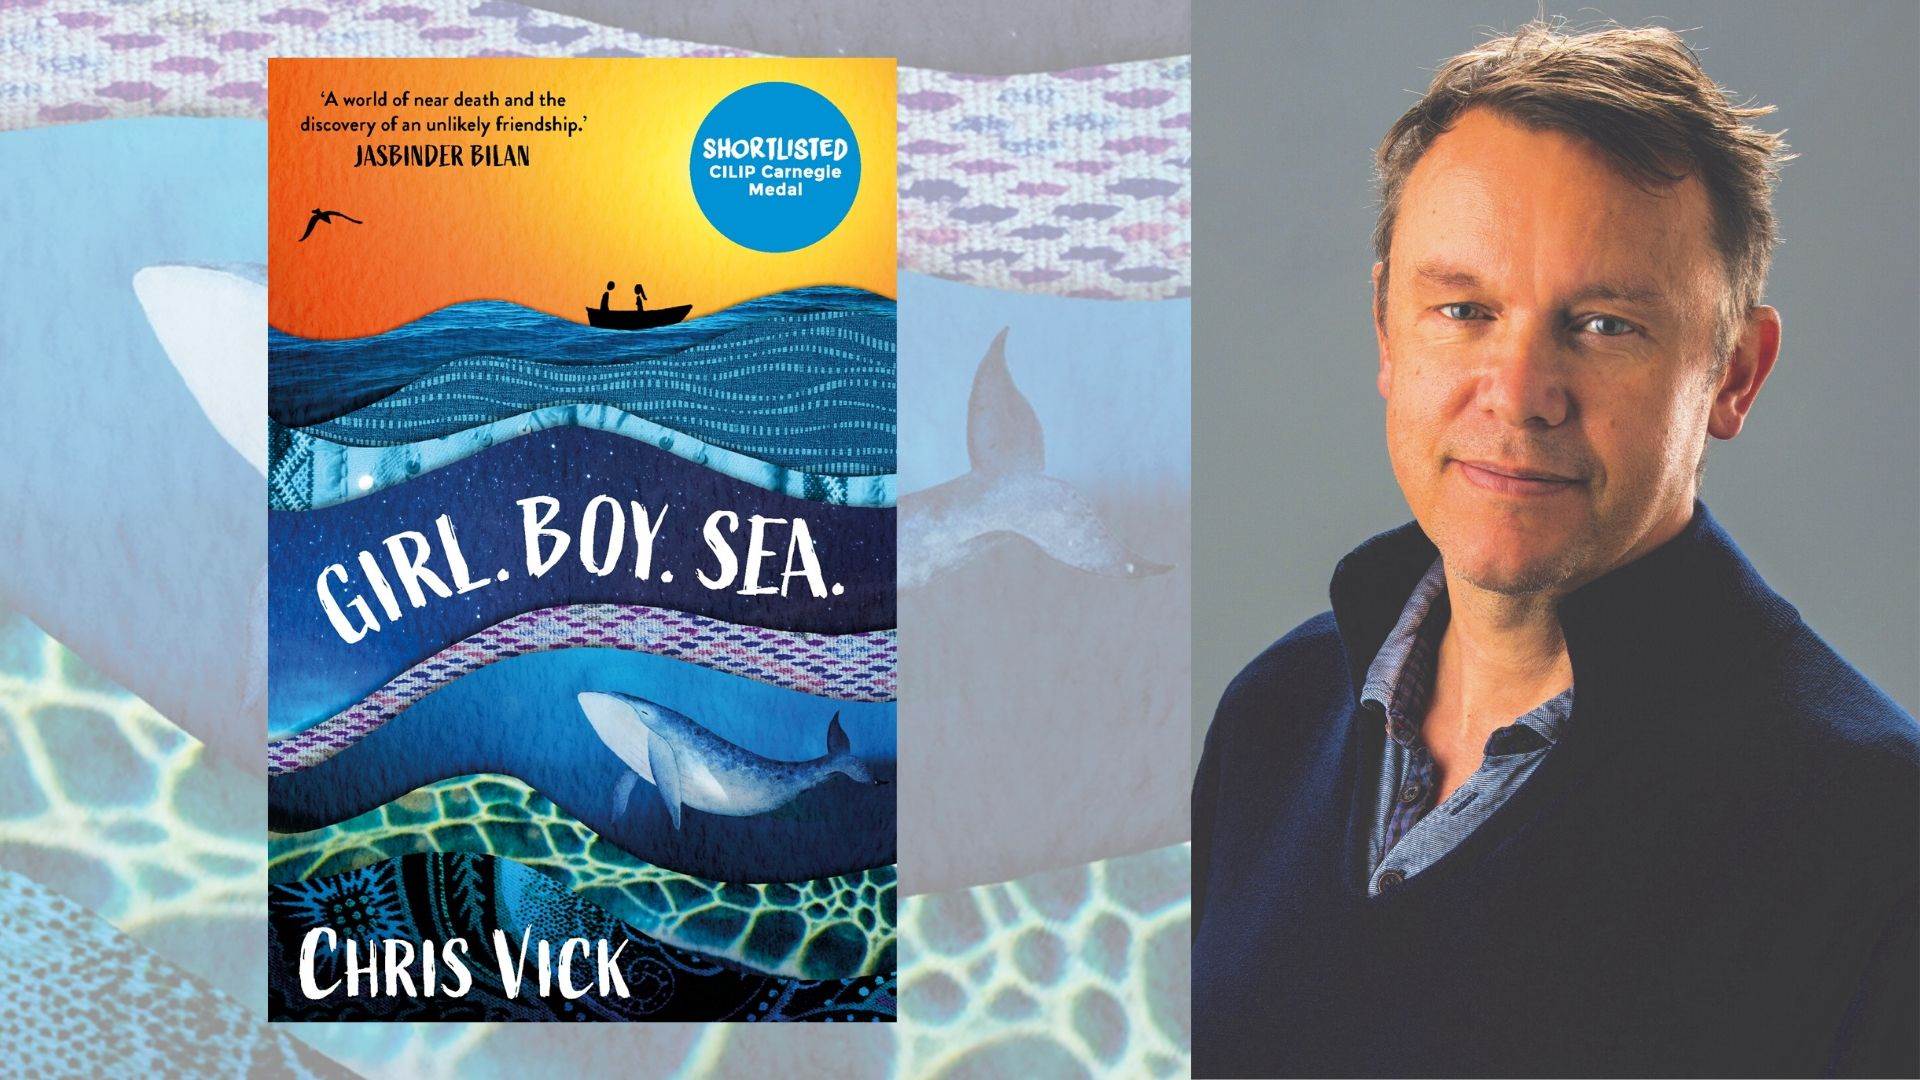 Author Chris Vick and the cover of Girl. Boy. Sea.